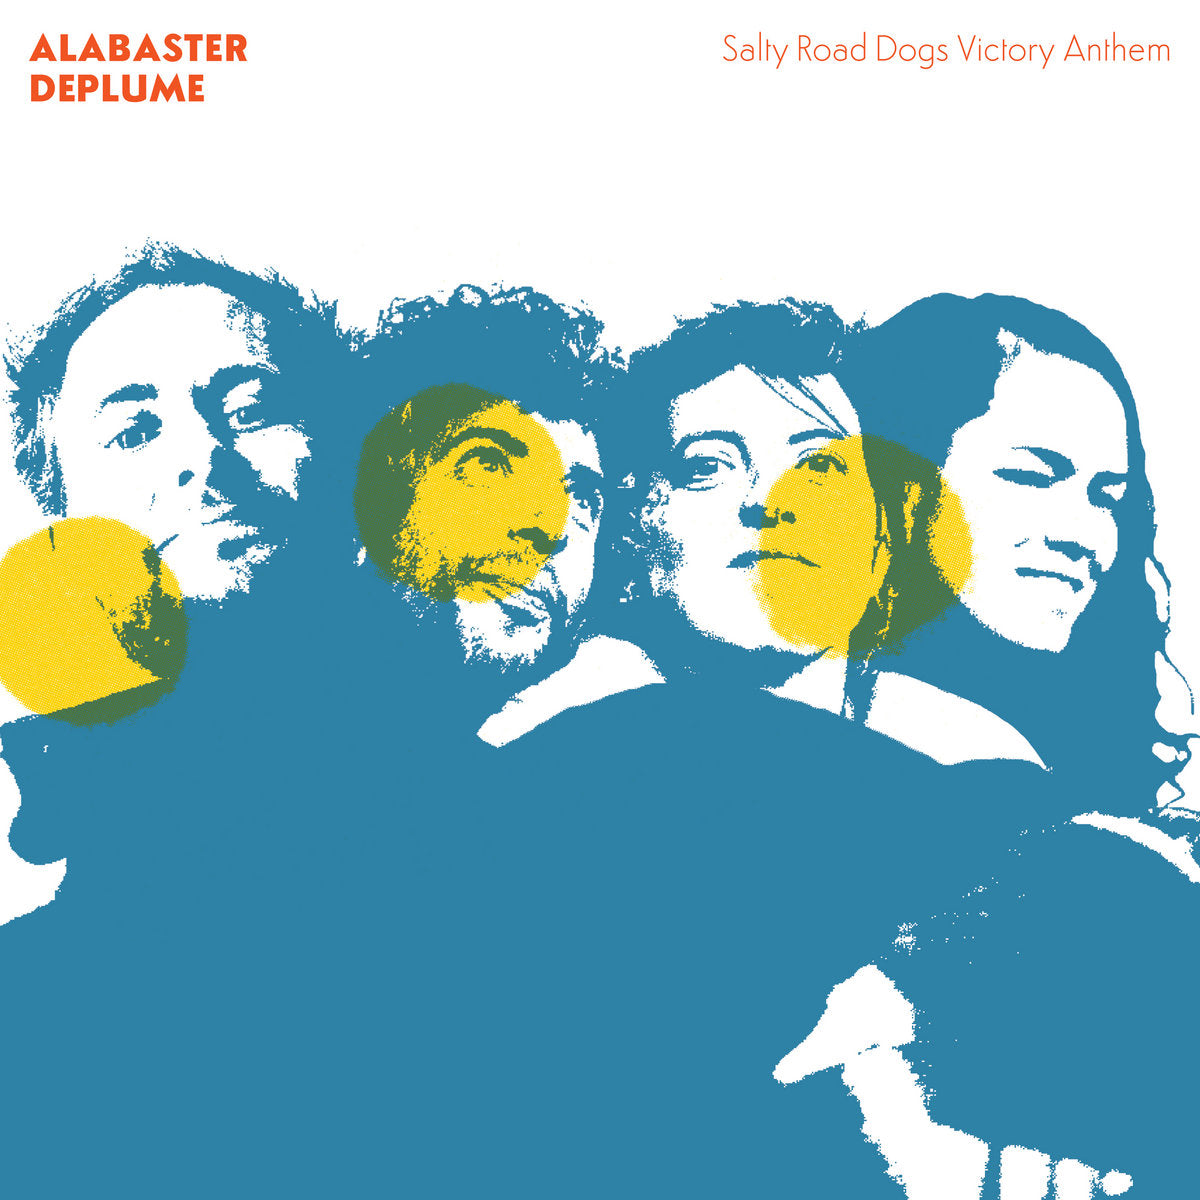 Salty Road Dogs Victory Anthem (New 7" Flexi)